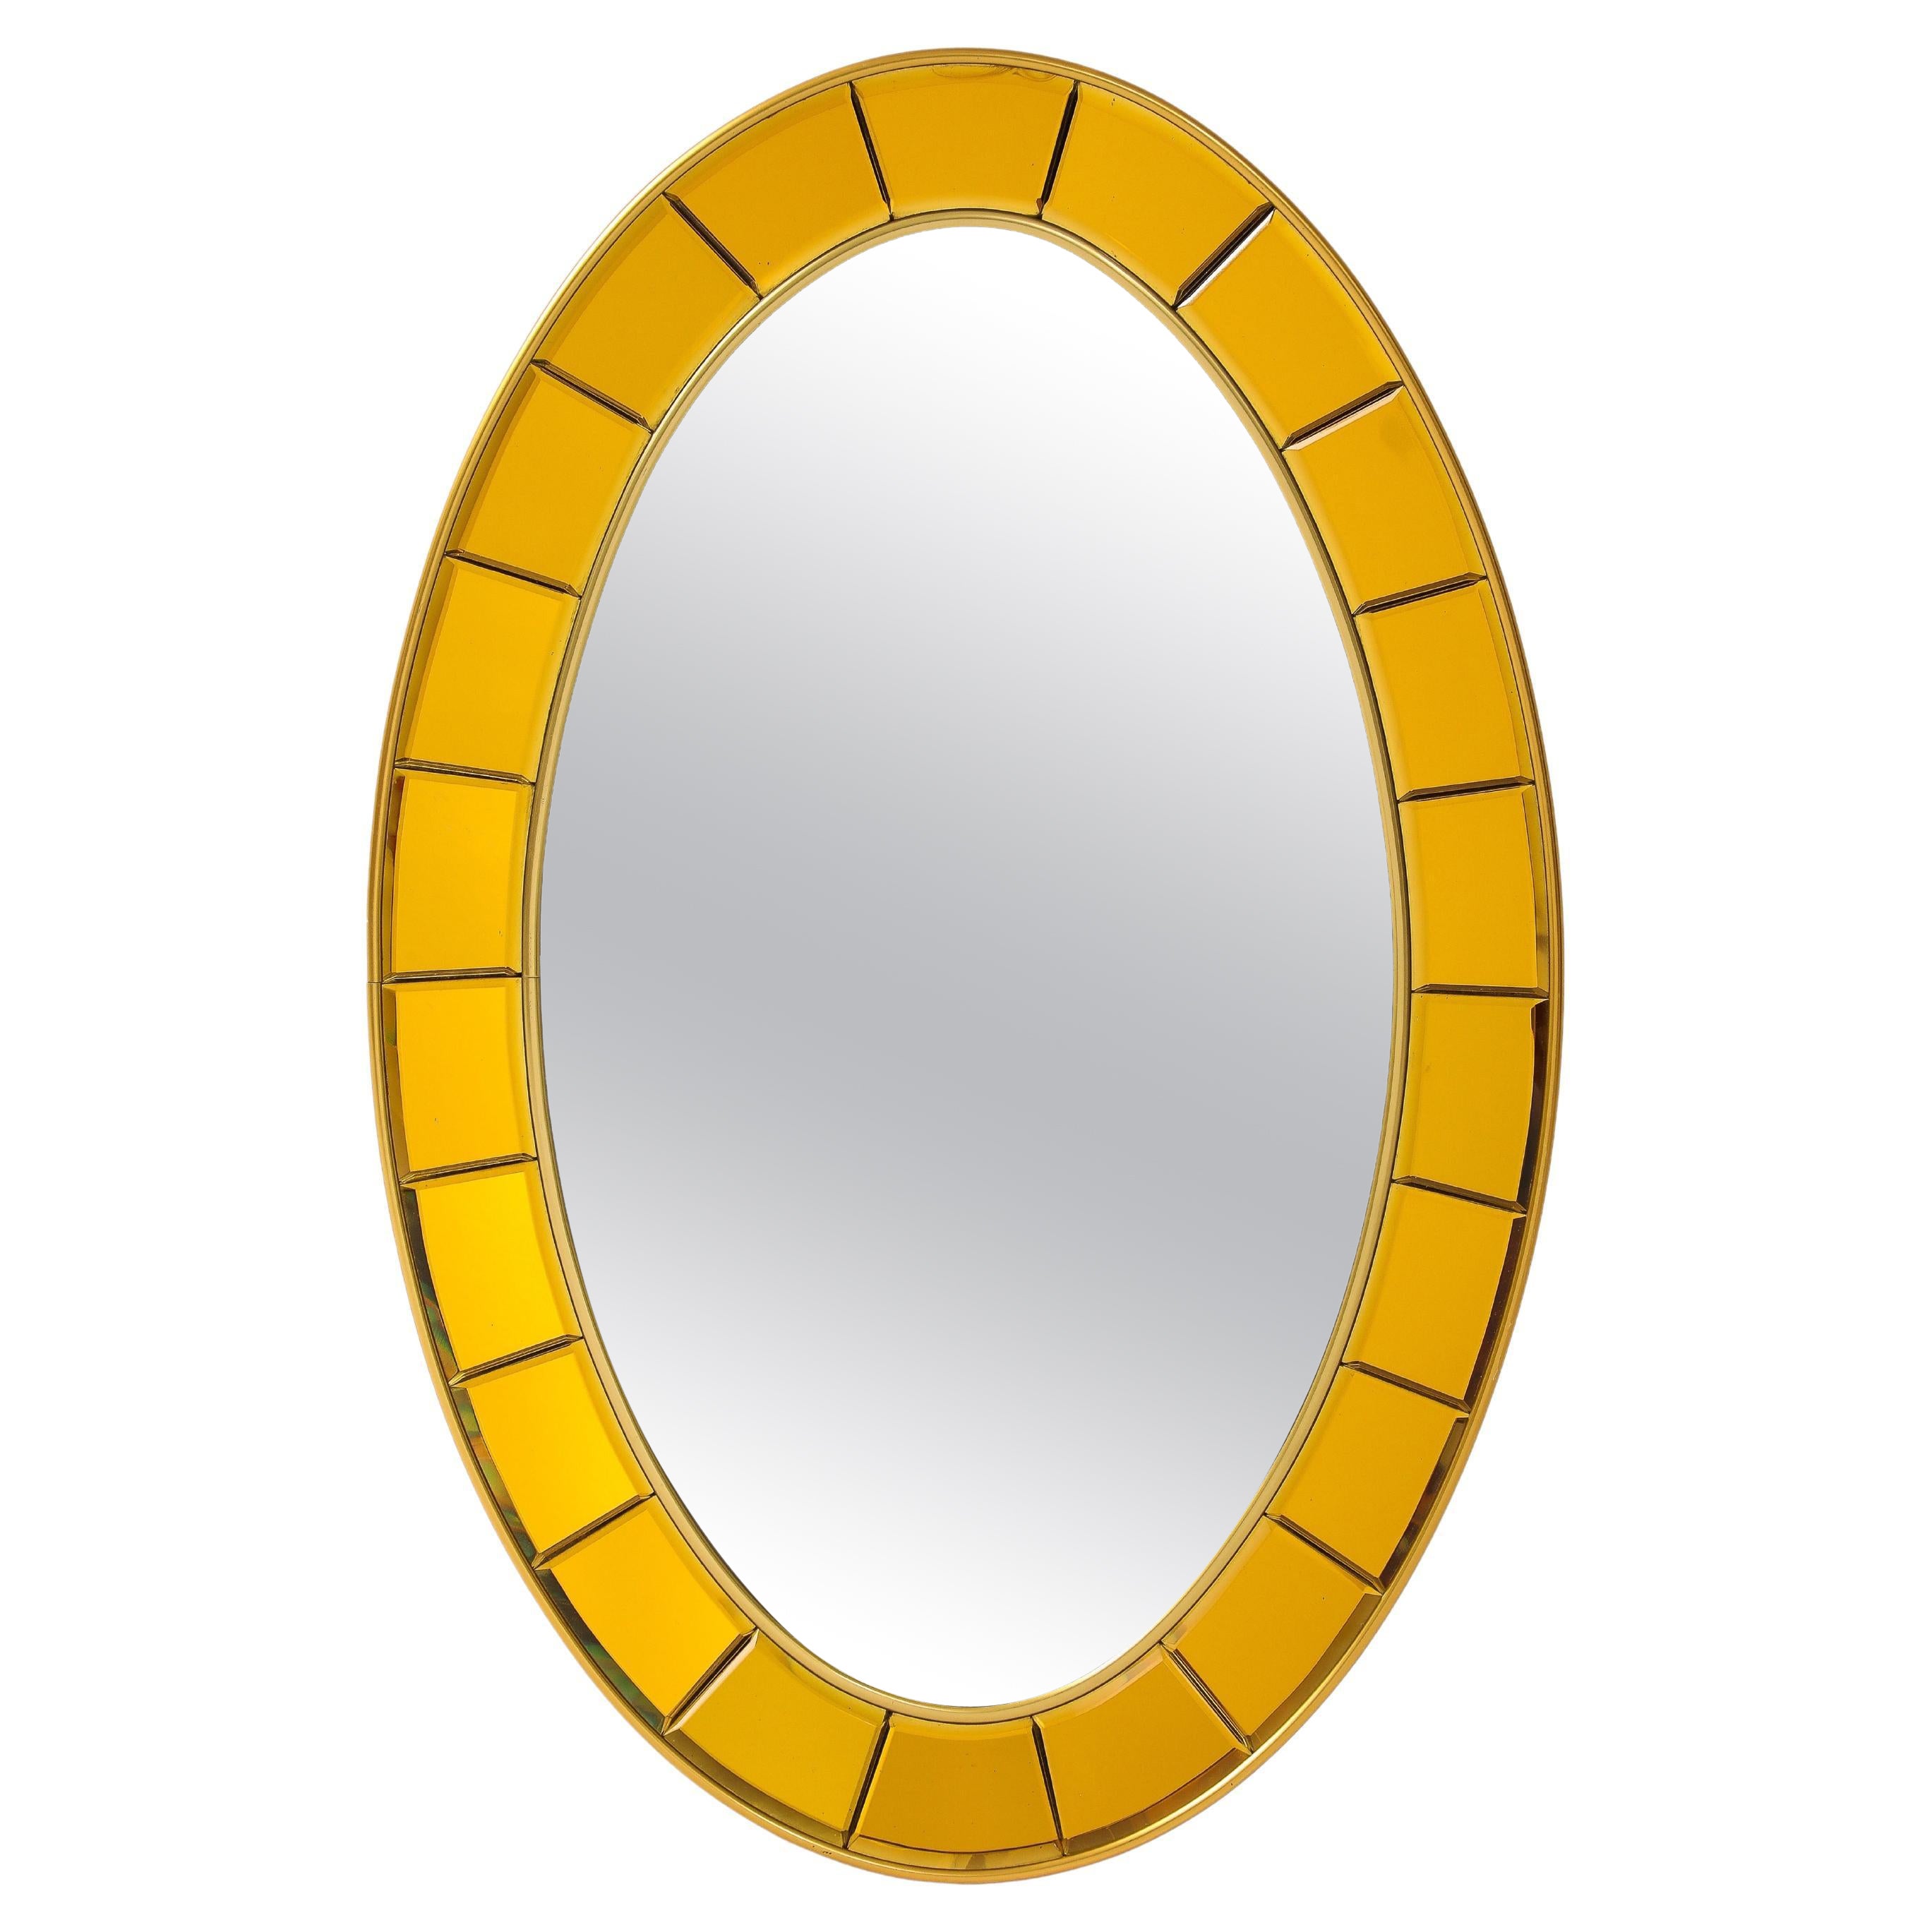 Cristal Art Oval Gold Hand-Cut Beveled Glass Mirror Model 2727, 1950s For Sale